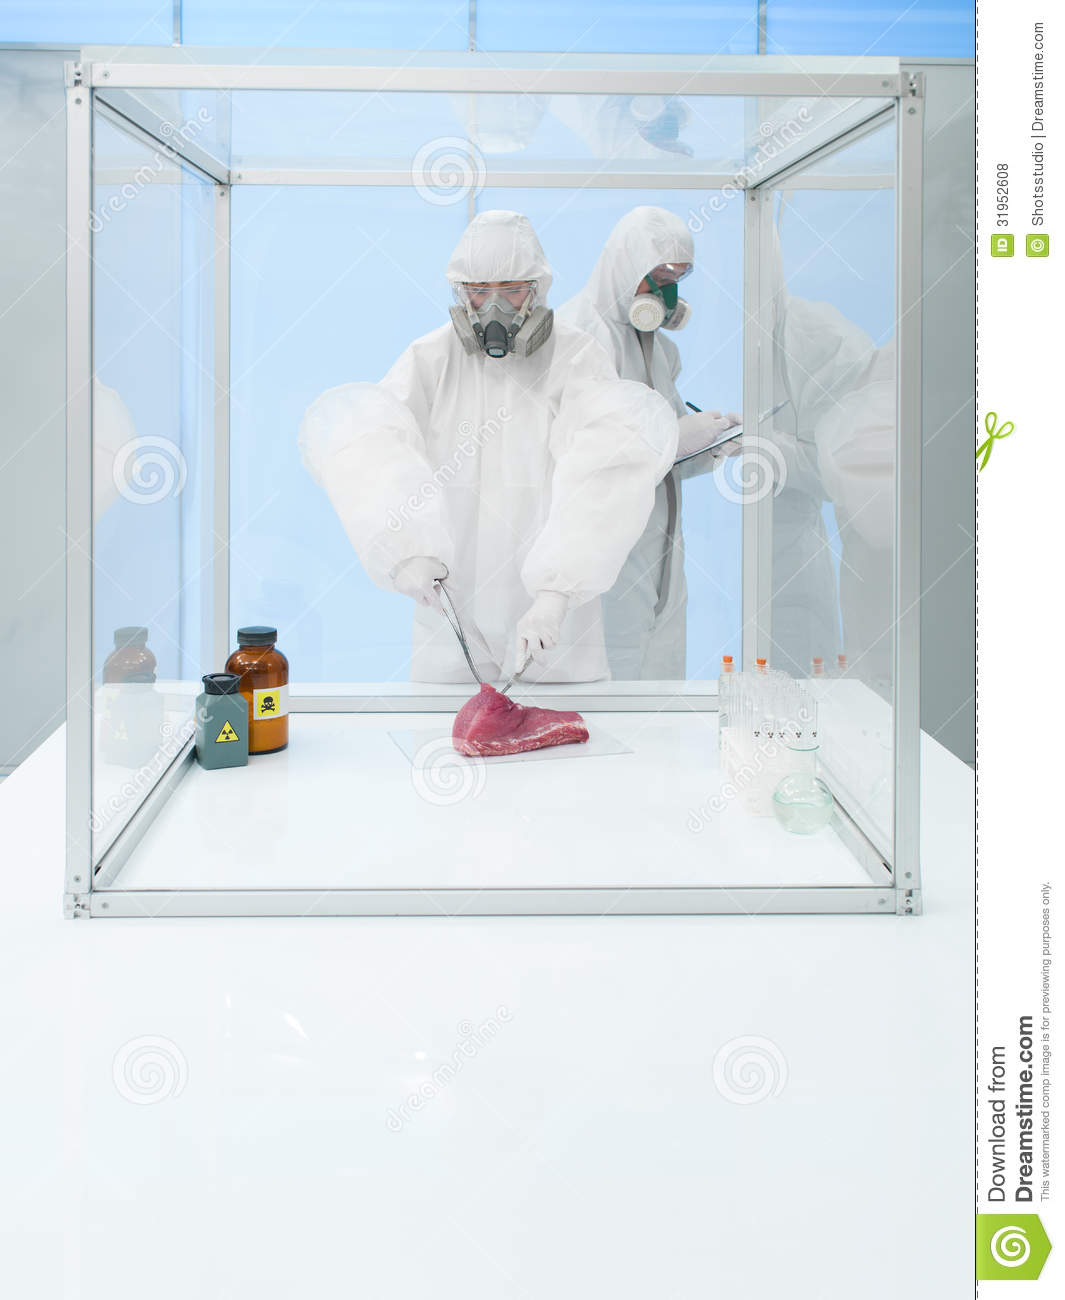 Experimenting On Raw Meat In Sterile Chamber Royalty Free Stock Photos    